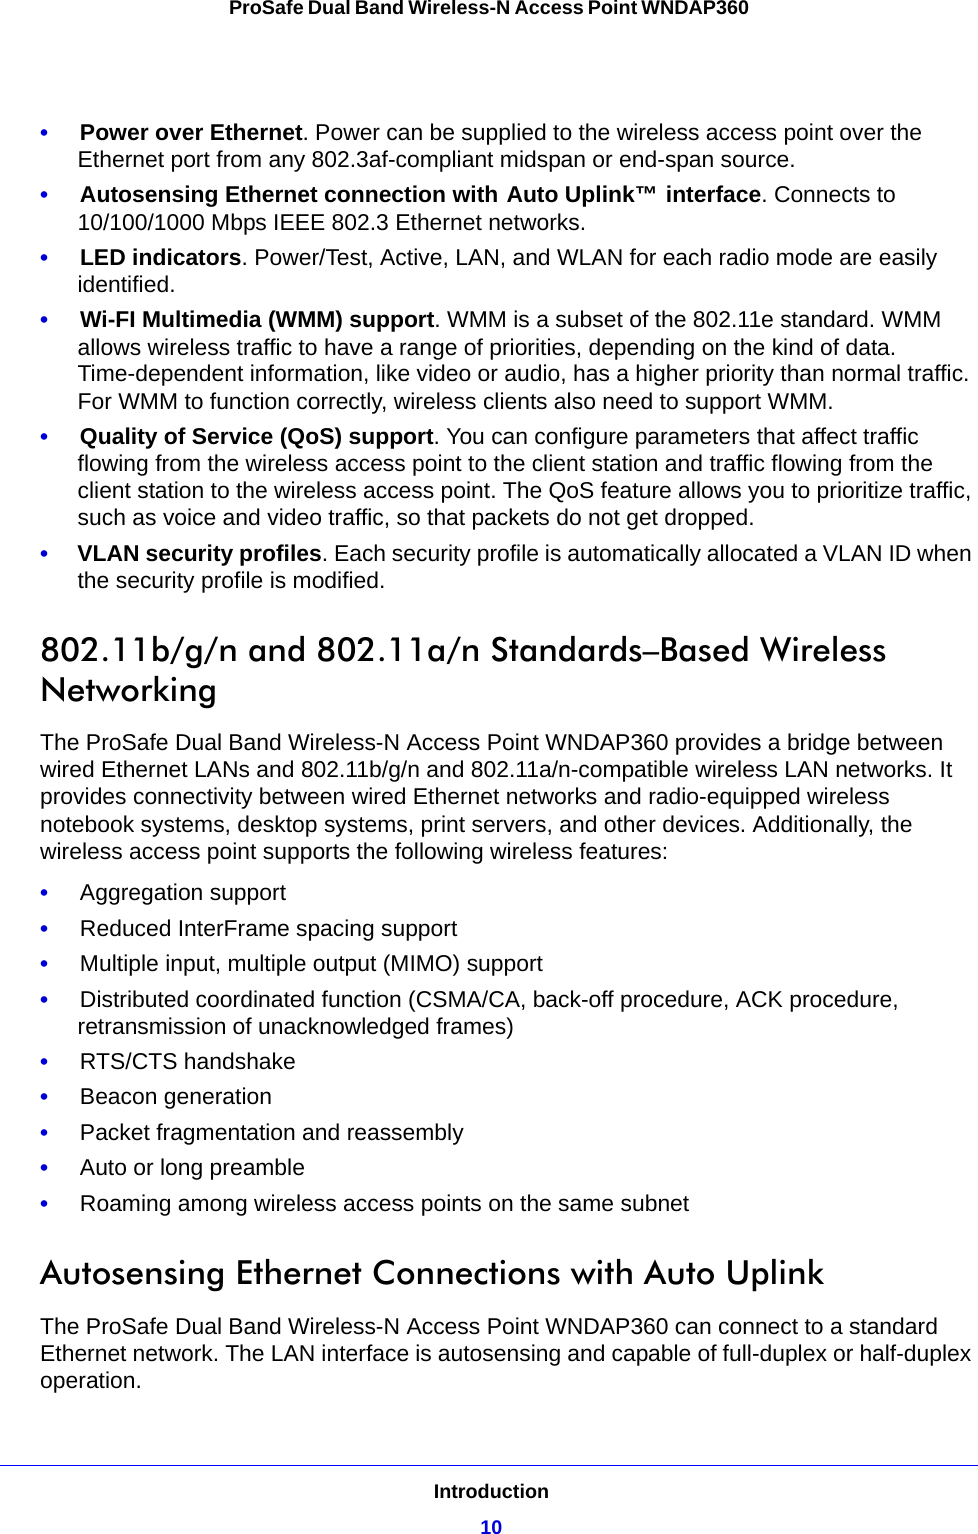 Introduction10ProSafe Dual Band Wireless-N Access Point WNDAP360 •     Power over Ethernet. Power can be supplied to the wireless access point over the Ethernet port from any 802.3af-compliant midspan or end-span source.•     Autosensing Ethernet connection with Auto Uplink™ interface. Connects to 10/100/1000 Mbps IEEE 802.3 Ethernet networks.•     LED indicators. Power/Test, Active, LAN, and WLAN for each radio mode are easily identified.•     Wi-FI Multimedia (WMM) support. WMM is a subset of the 802.11e standard. WMM allows wireless traffic to have a range of priorities, depending on the kind of data. Time-dependent information, like video or audio, has a higher priority than normal traffic. For WMM to function correctly, wireless clients also need to support WMM. •     Quality of Service (QoS) support. You can configure parameters that affect traffic flowing from the wireless access point to the client station and traffic flowing from the client station to the wireless access point. The QoS feature allows you to prioritize traffic, such as voice and video traffic, so that packets do not get dropped.•     VLAN security profiles. Each security profile is automatically allocated a VLAN ID when the security profile is modified.802.11b/g/n and 802.11a/n Standards–Based Wireless NetworkingThe ProSafe Dual Band Wireless-N Access Point WNDAP360 provides a bridge between wired Ethernet LANs and 802.11b/g/n and 802.11a/n-compatible wireless LAN networks. It provides connectivity between wired Ethernet networks and radio-equipped wireless notebook systems, desktop systems, print servers, and other devices. Additionally, the wireless access point supports the following wireless features:•     Aggregation support•     Reduced InterFrame spacing support•     Multiple input, multiple output (MIMO) support•     Distributed coordinated function (CSMA/CA, back-off procedure, ACK procedure, retransmission of unacknowledged frames)•     RTS/CTS handshake•     Beacon generation•     Packet fragmentation and reassembly•     Auto or long preamble•     Roaming among wireless access points on the same subnetAutosensing Ethernet Connections with Auto Uplink The ProSafe Dual Band Wireless-N Access Point WNDAP360 can connect to a standard Ethernet network. The LAN interface is autosensing and capable of full-duplex or half-duplex operation. 